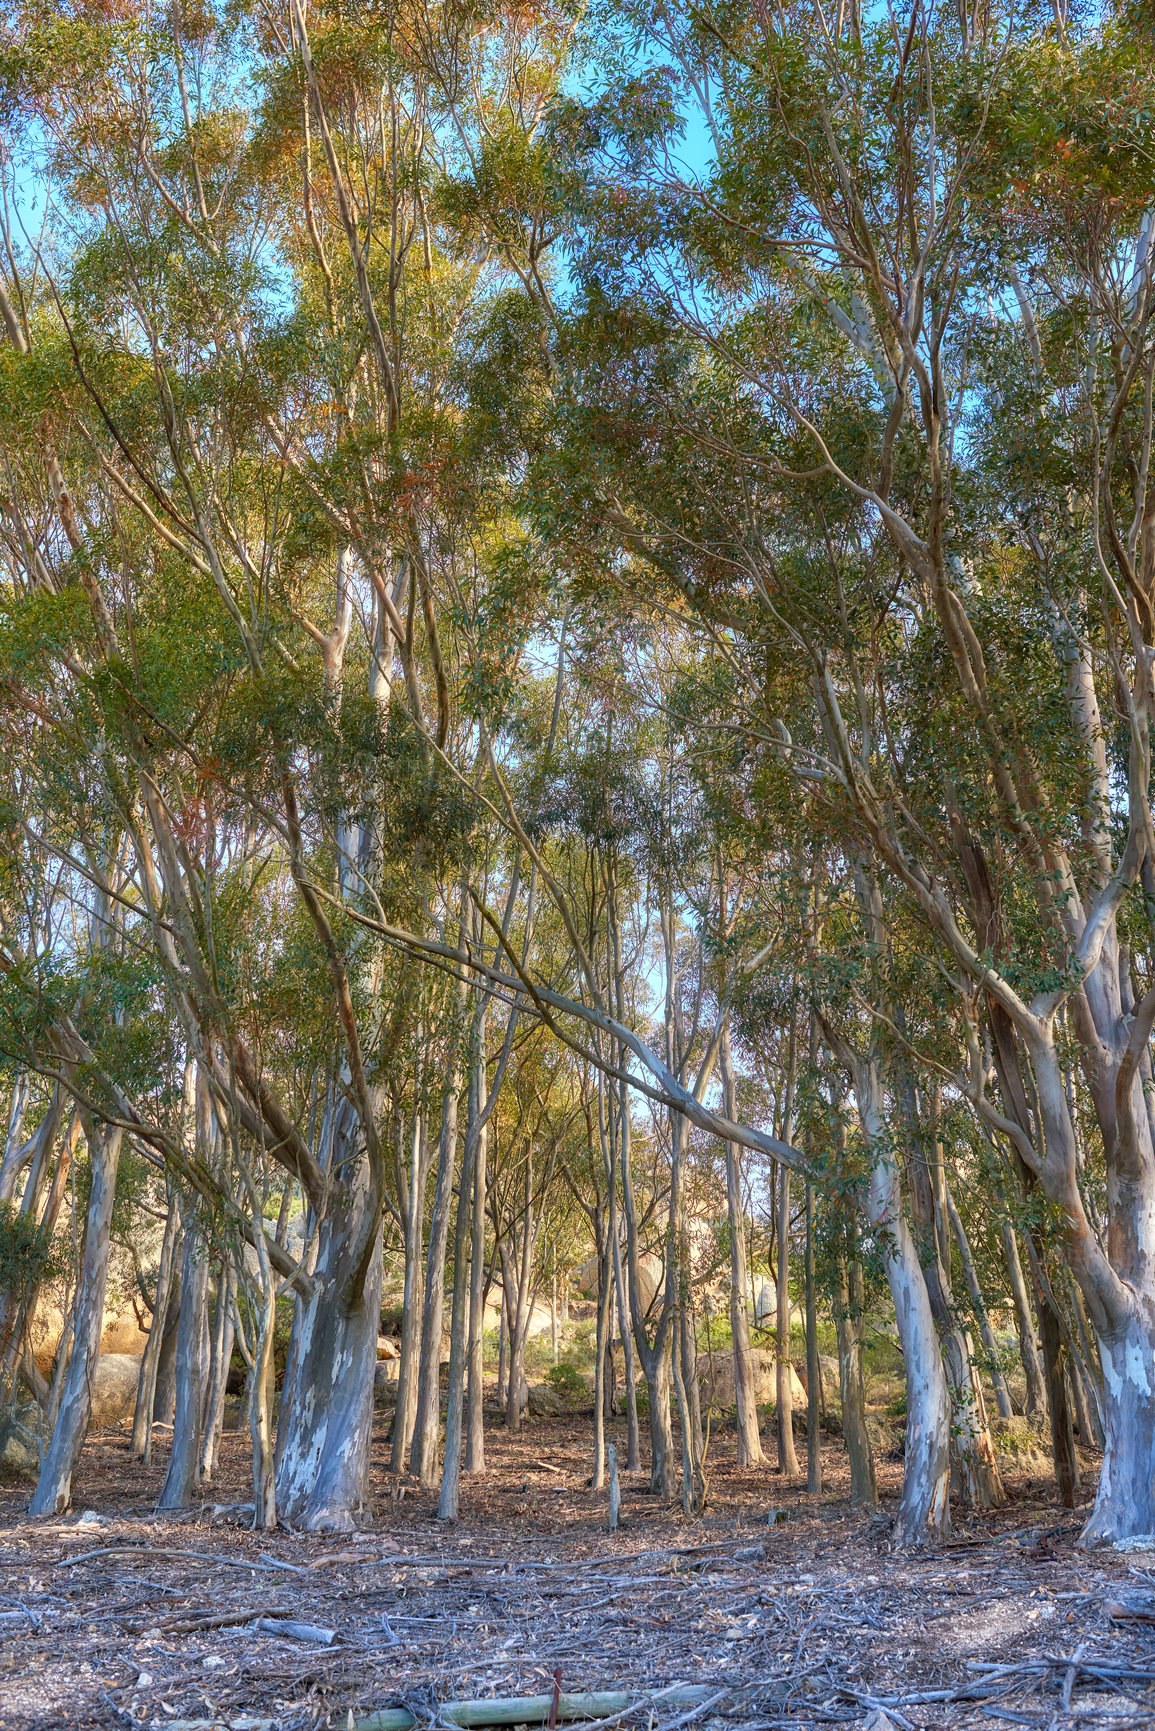 Buy stock photo Landscape of eucalyptus gum trees growing in quiet woods on Table Mountain, Cape Town, South Africa. Green evergreen forest in remote countryside. Environmental nature conservation or deforestation